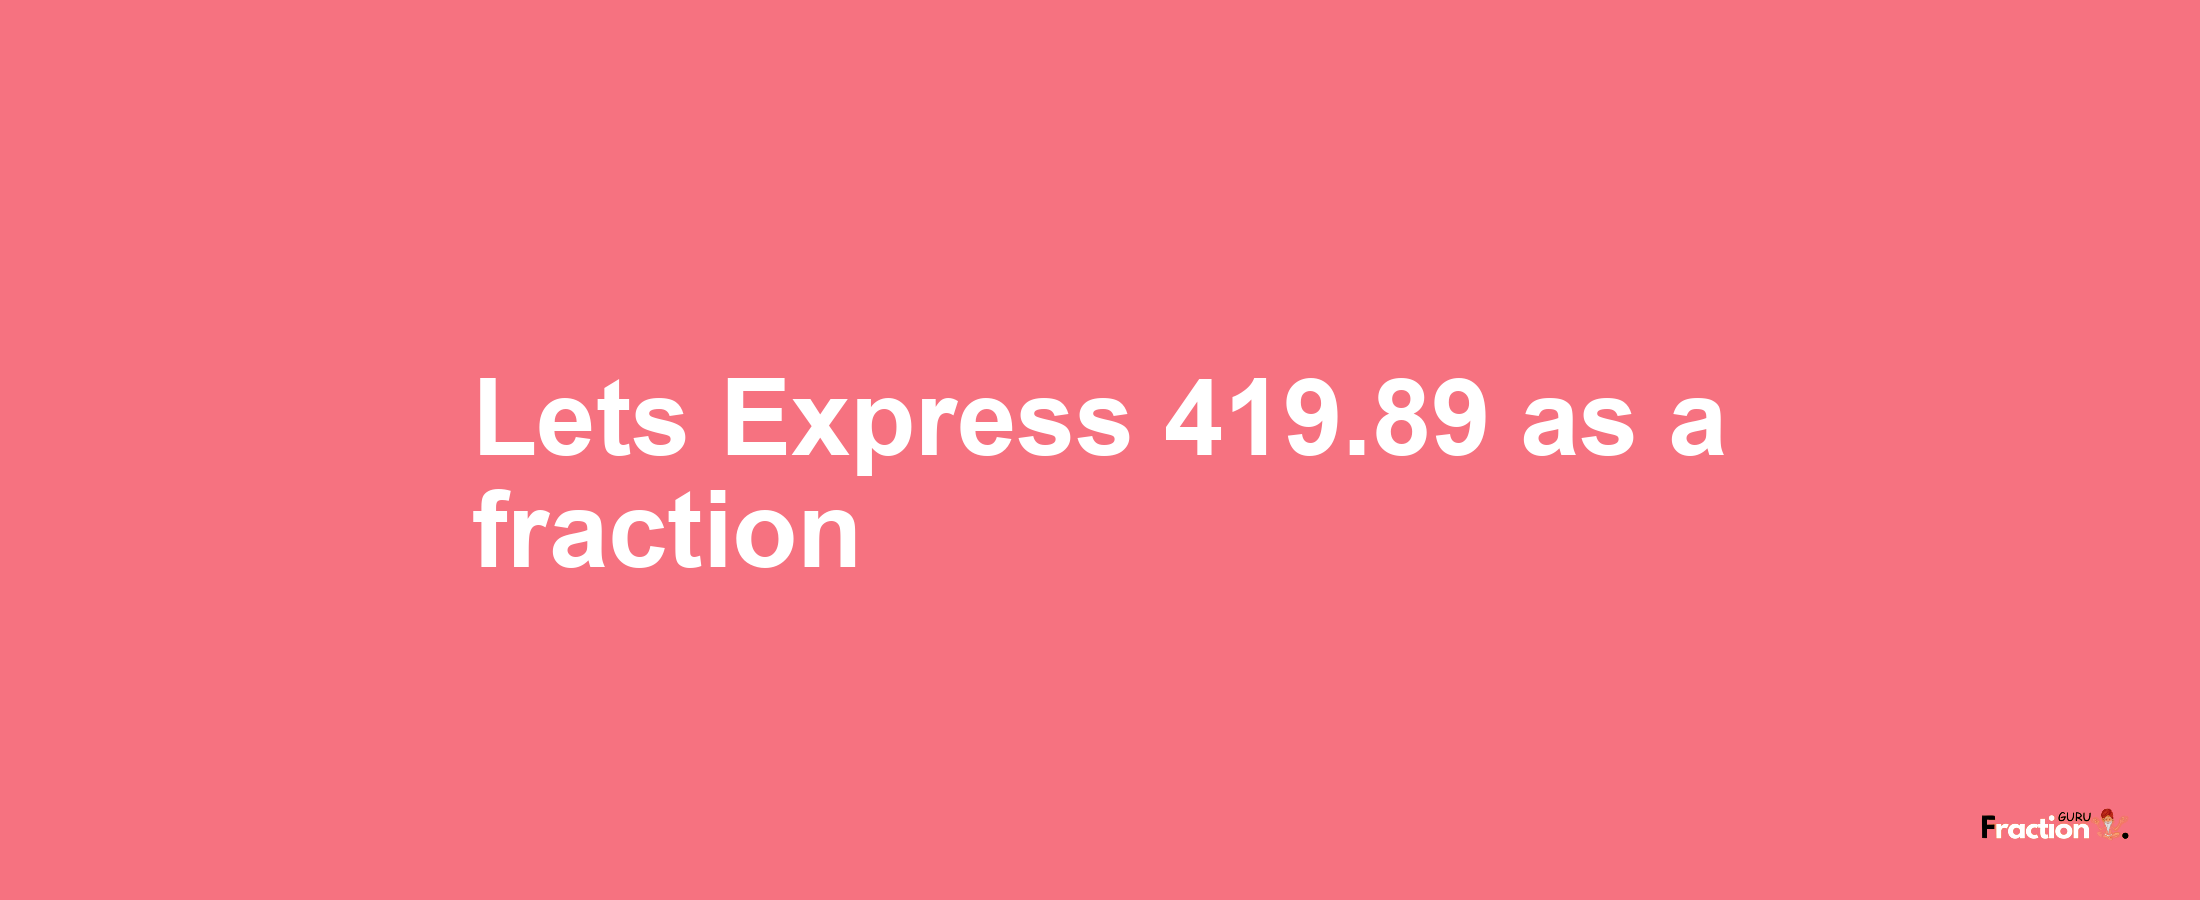 Lets Express 419.89 as afraction